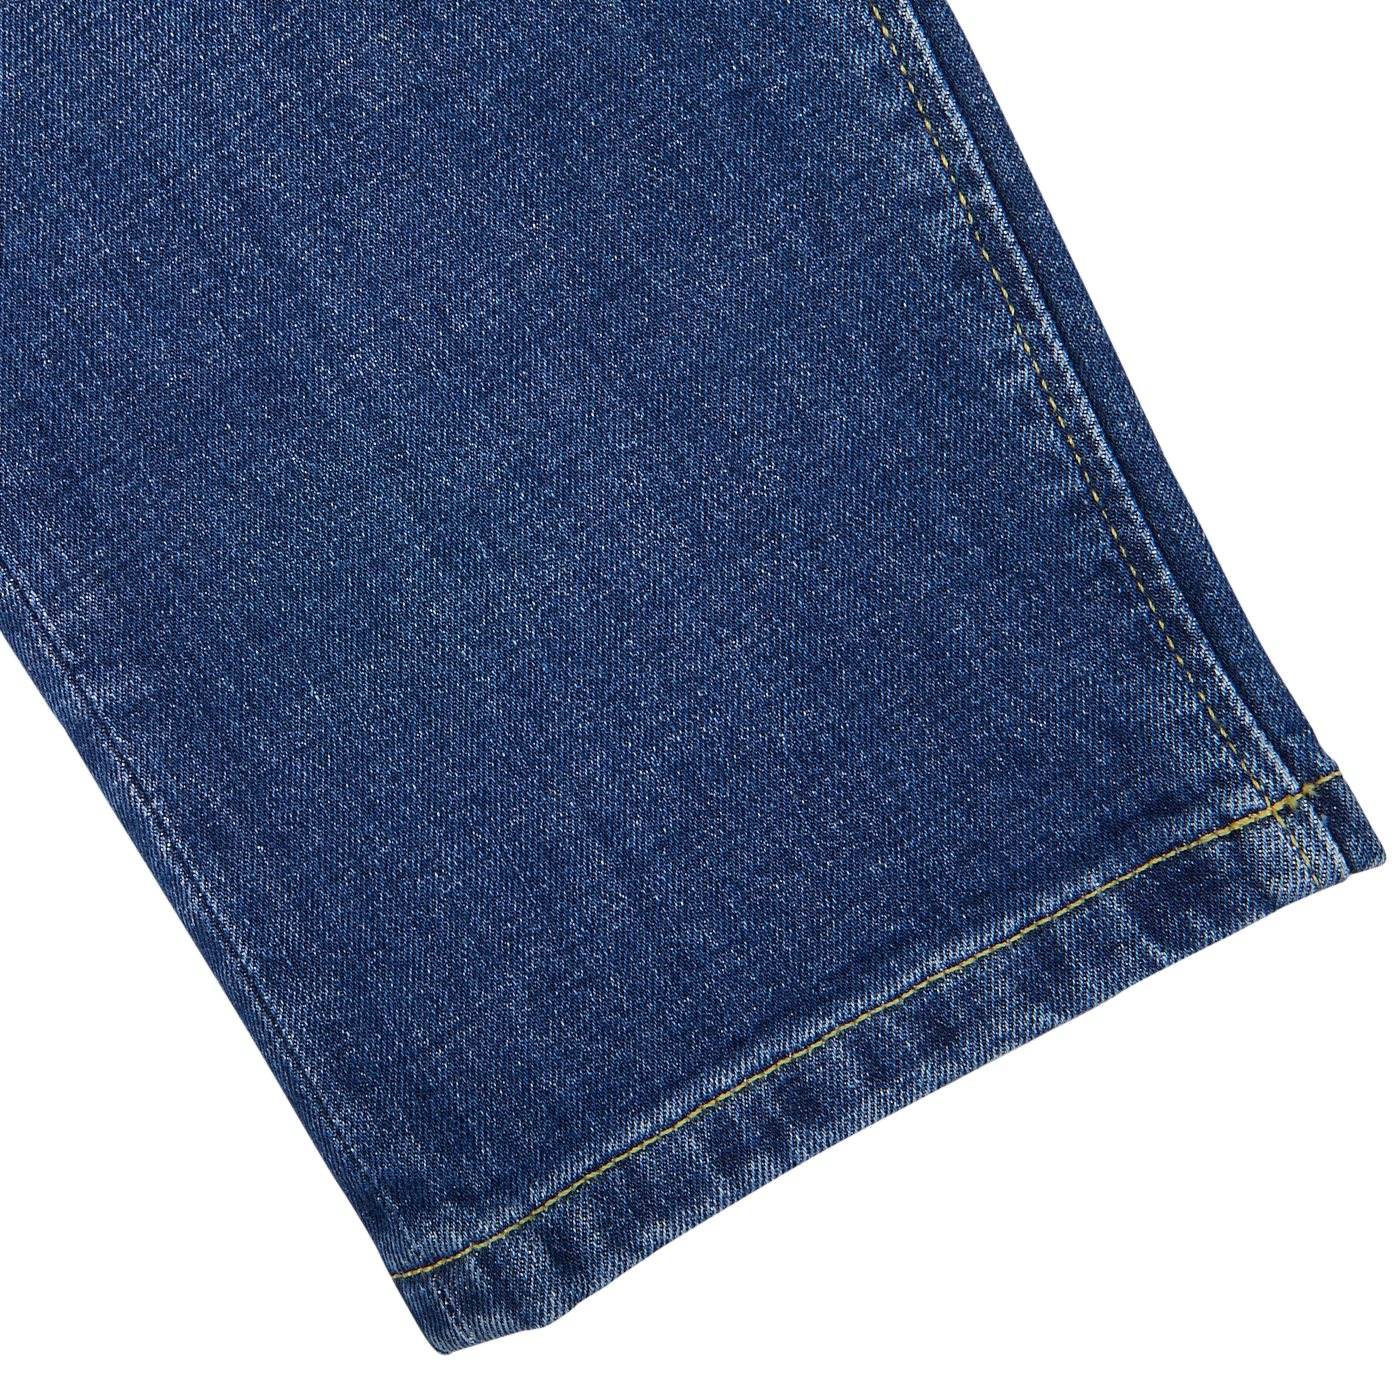 Blue organic denim fabric with yellow stitching on a white background, featuring the Medium Blue Washed Cotton TM005 Jeans by Jeanerica.